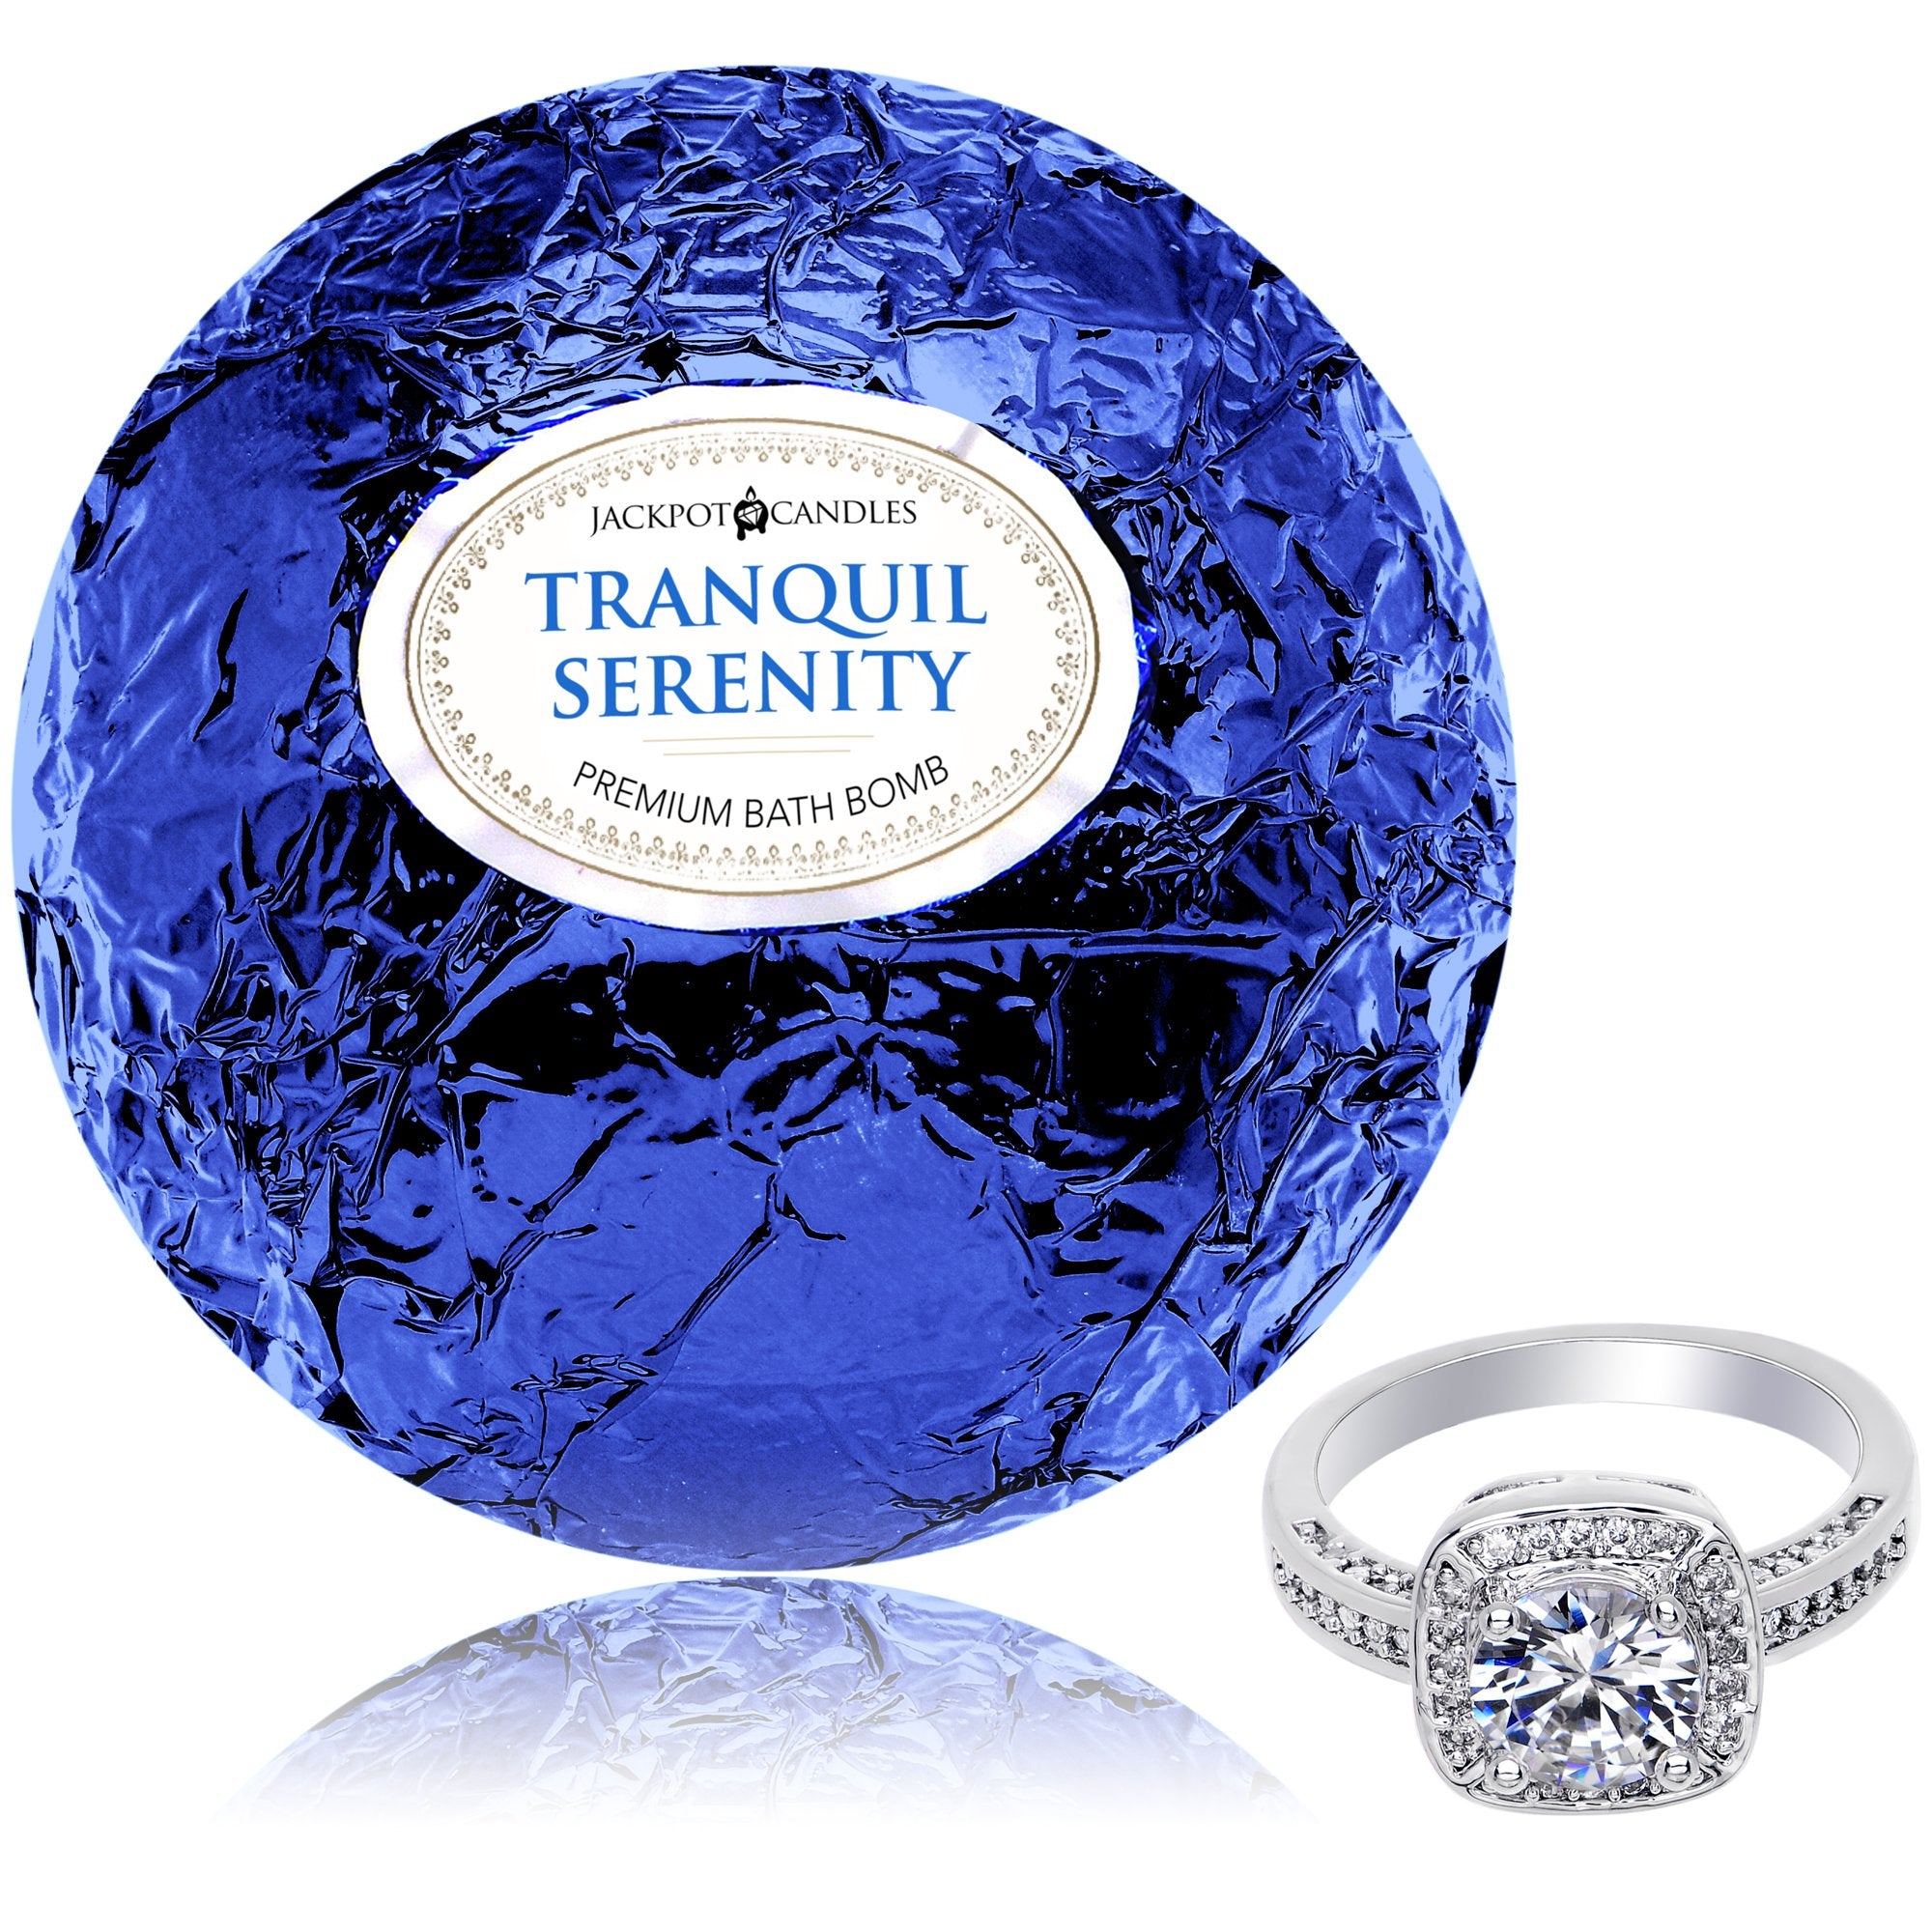 Tranquil Serenity Bath Bomb with Jewelry Ring Inside